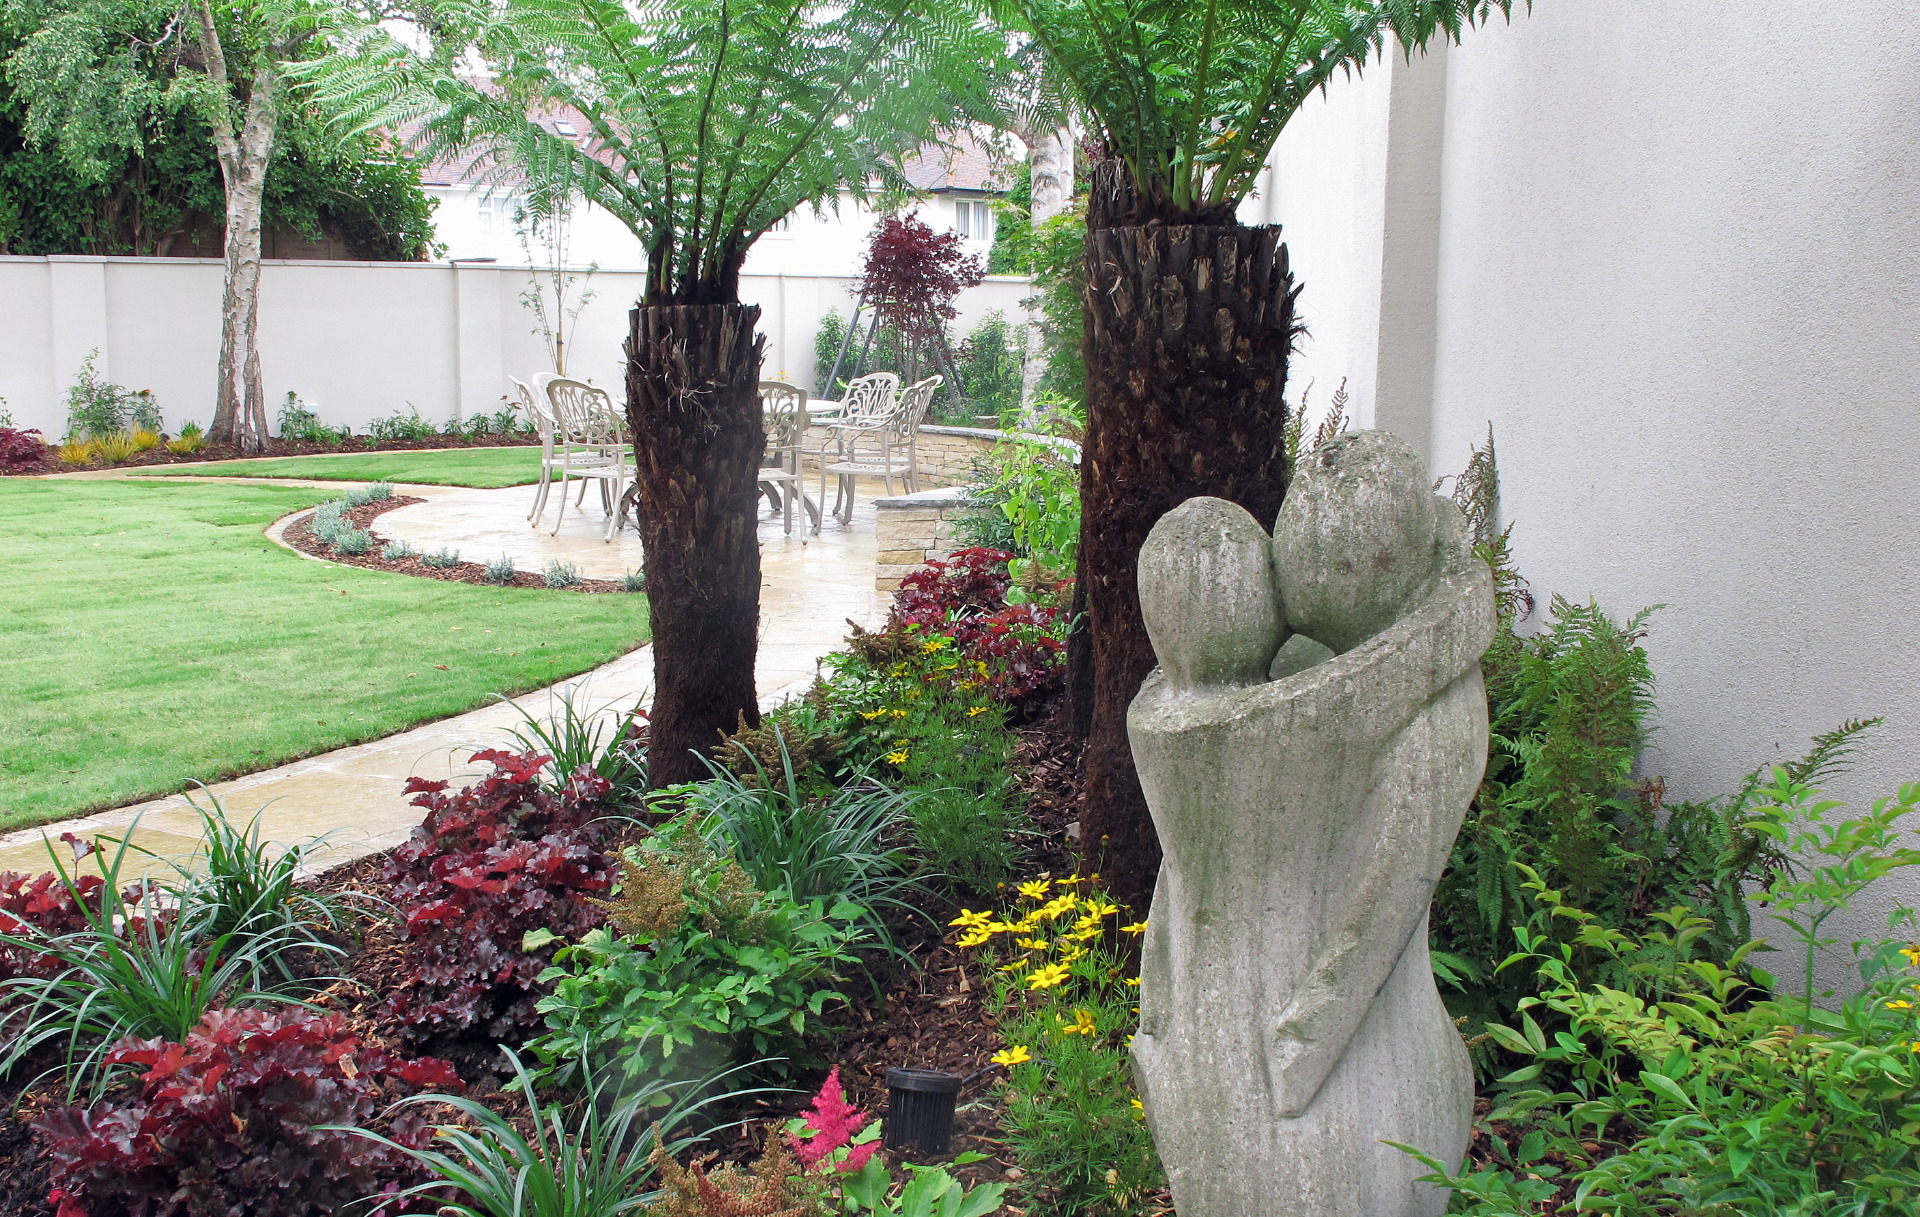 Creatively designed Planted Borders | Owen Chubb Garden Landscapers, Tel 087-2306 128.